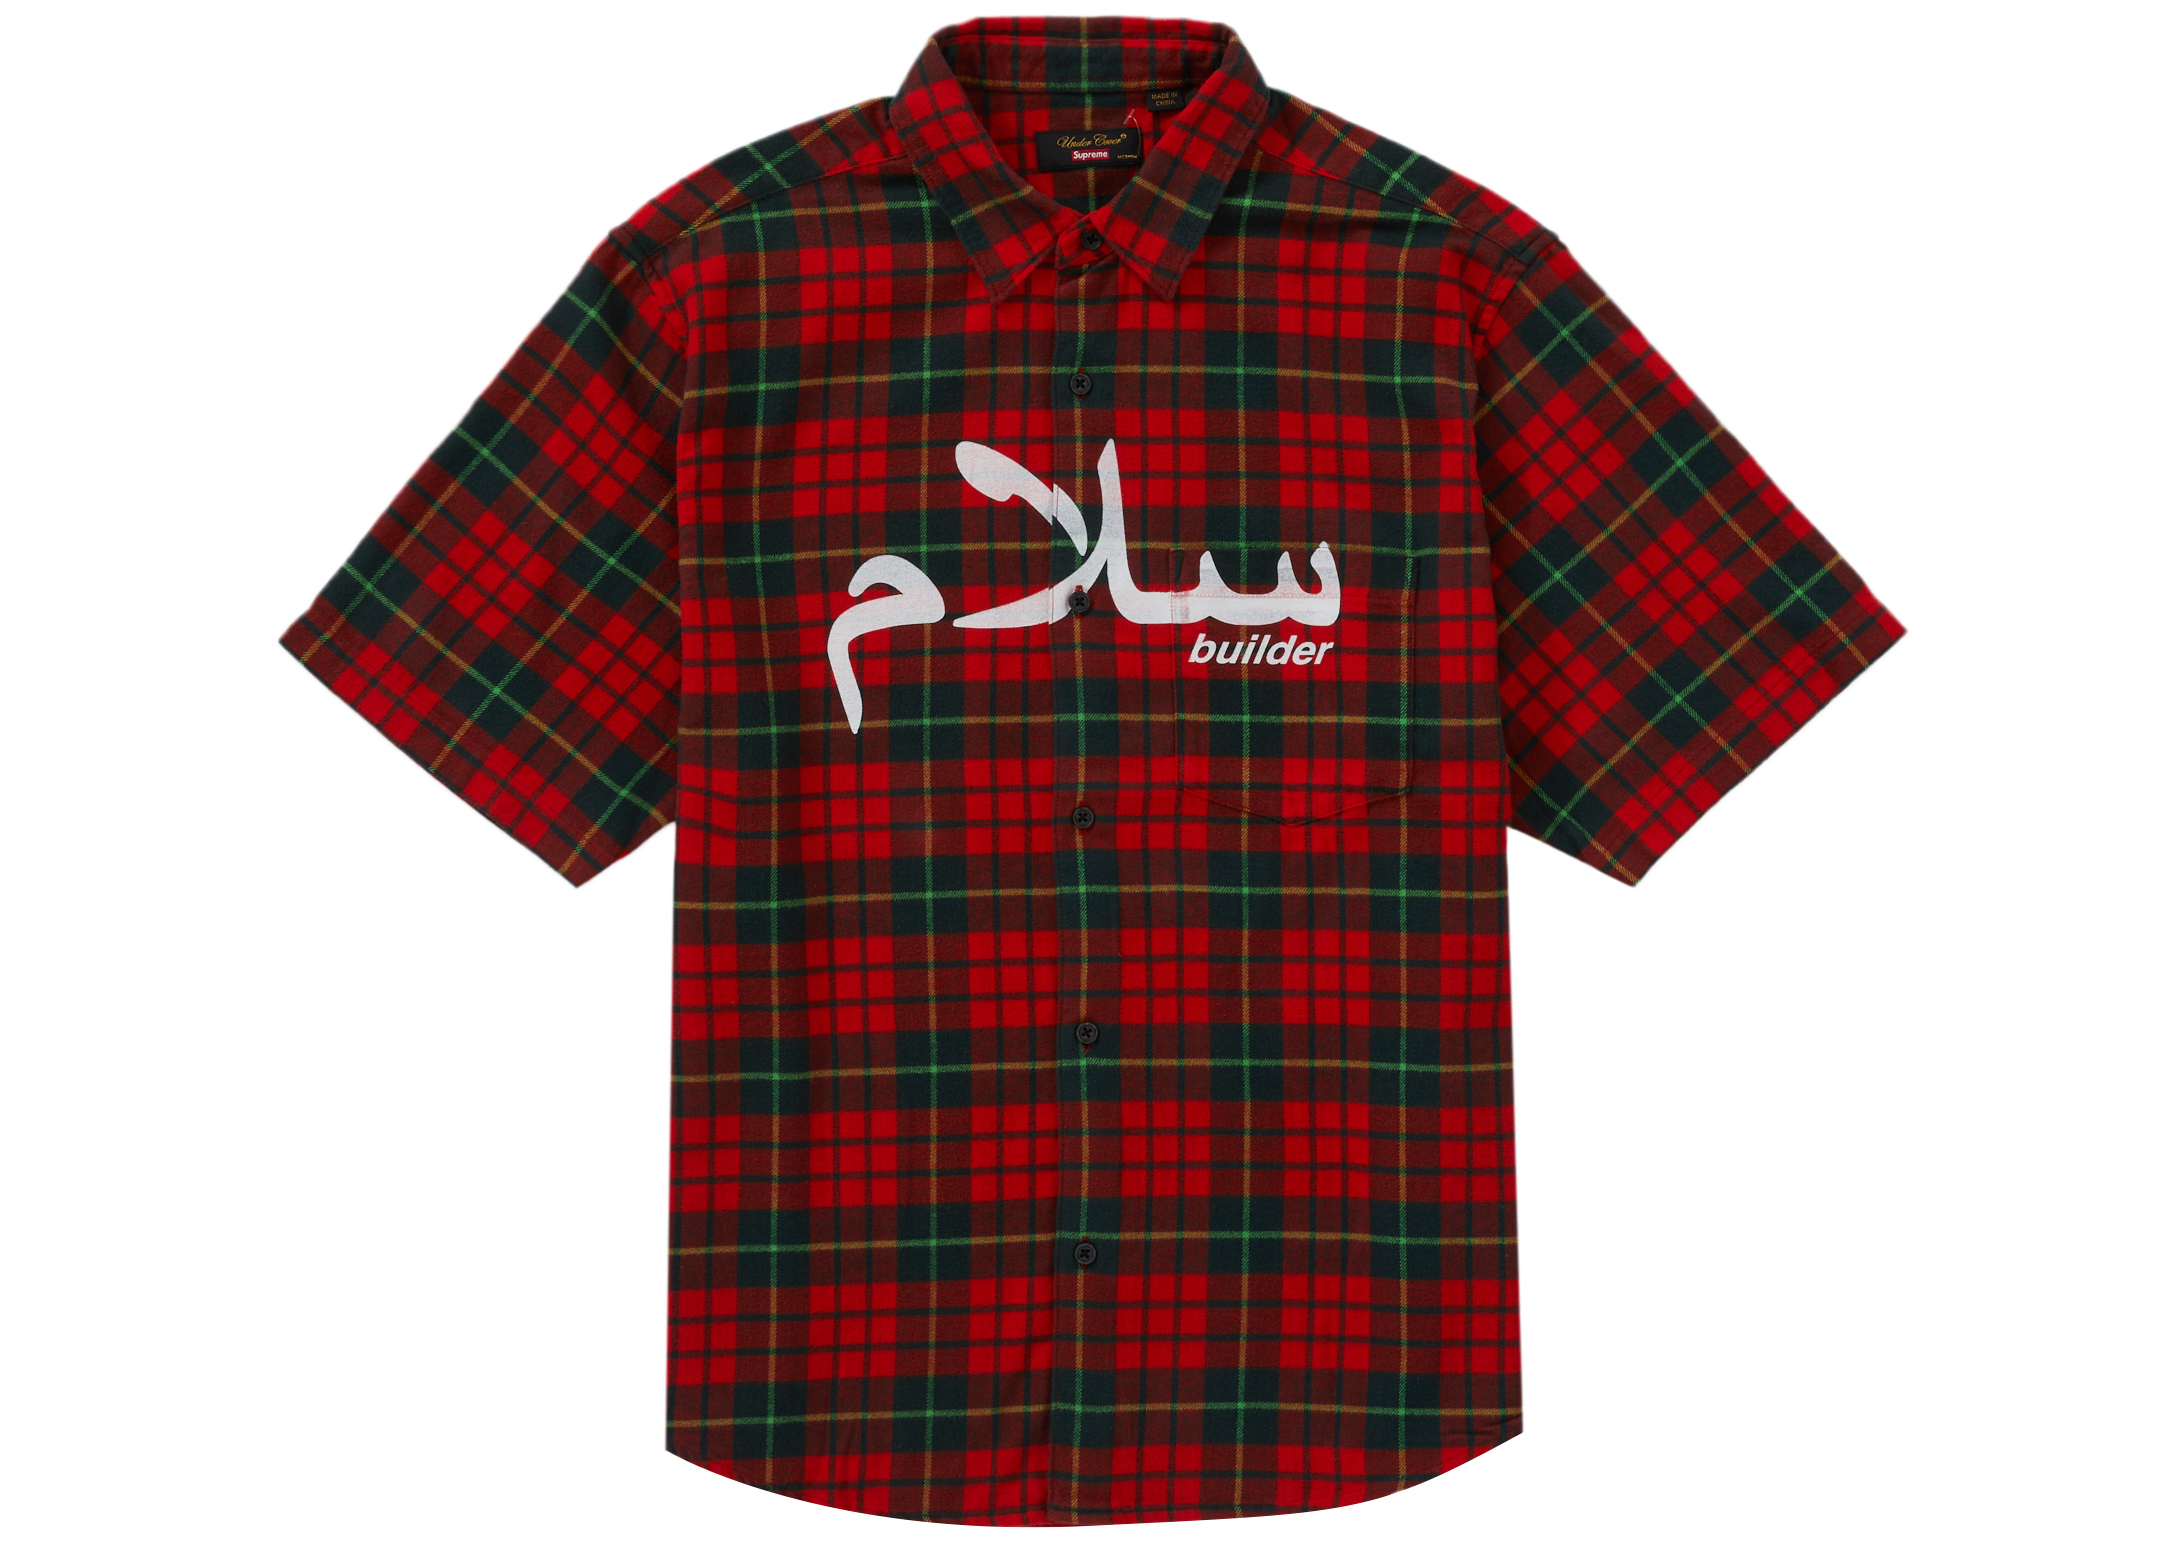 Supreme / Undercover S/S Flannel Shirt 